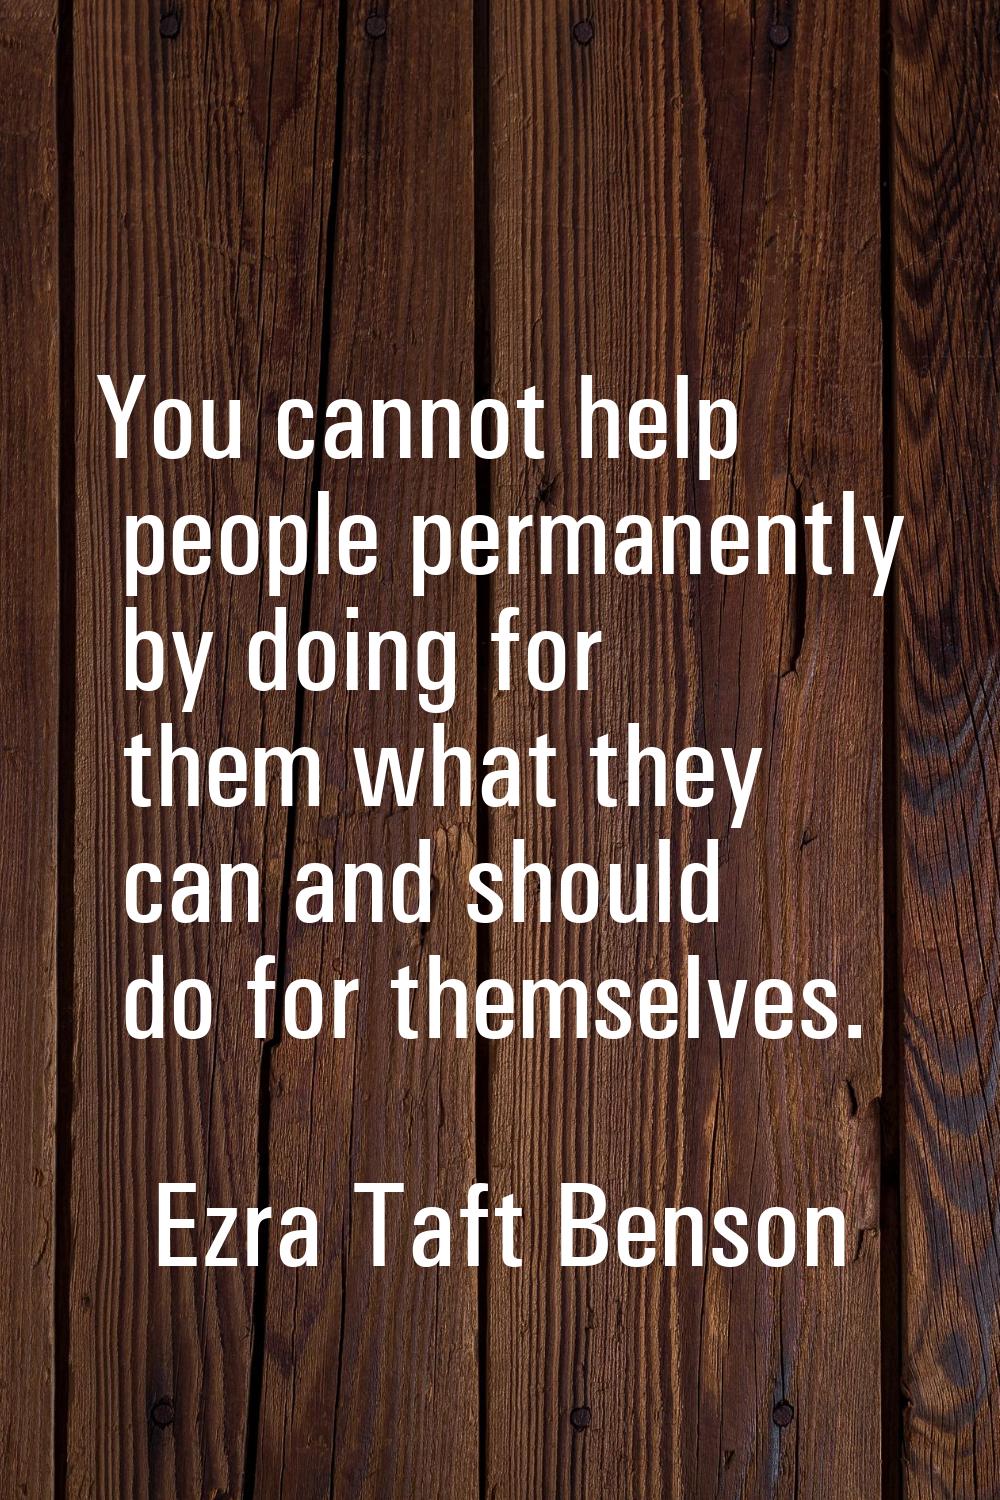 You cannot help people permanently by doing for them what they can and should do for themselves.